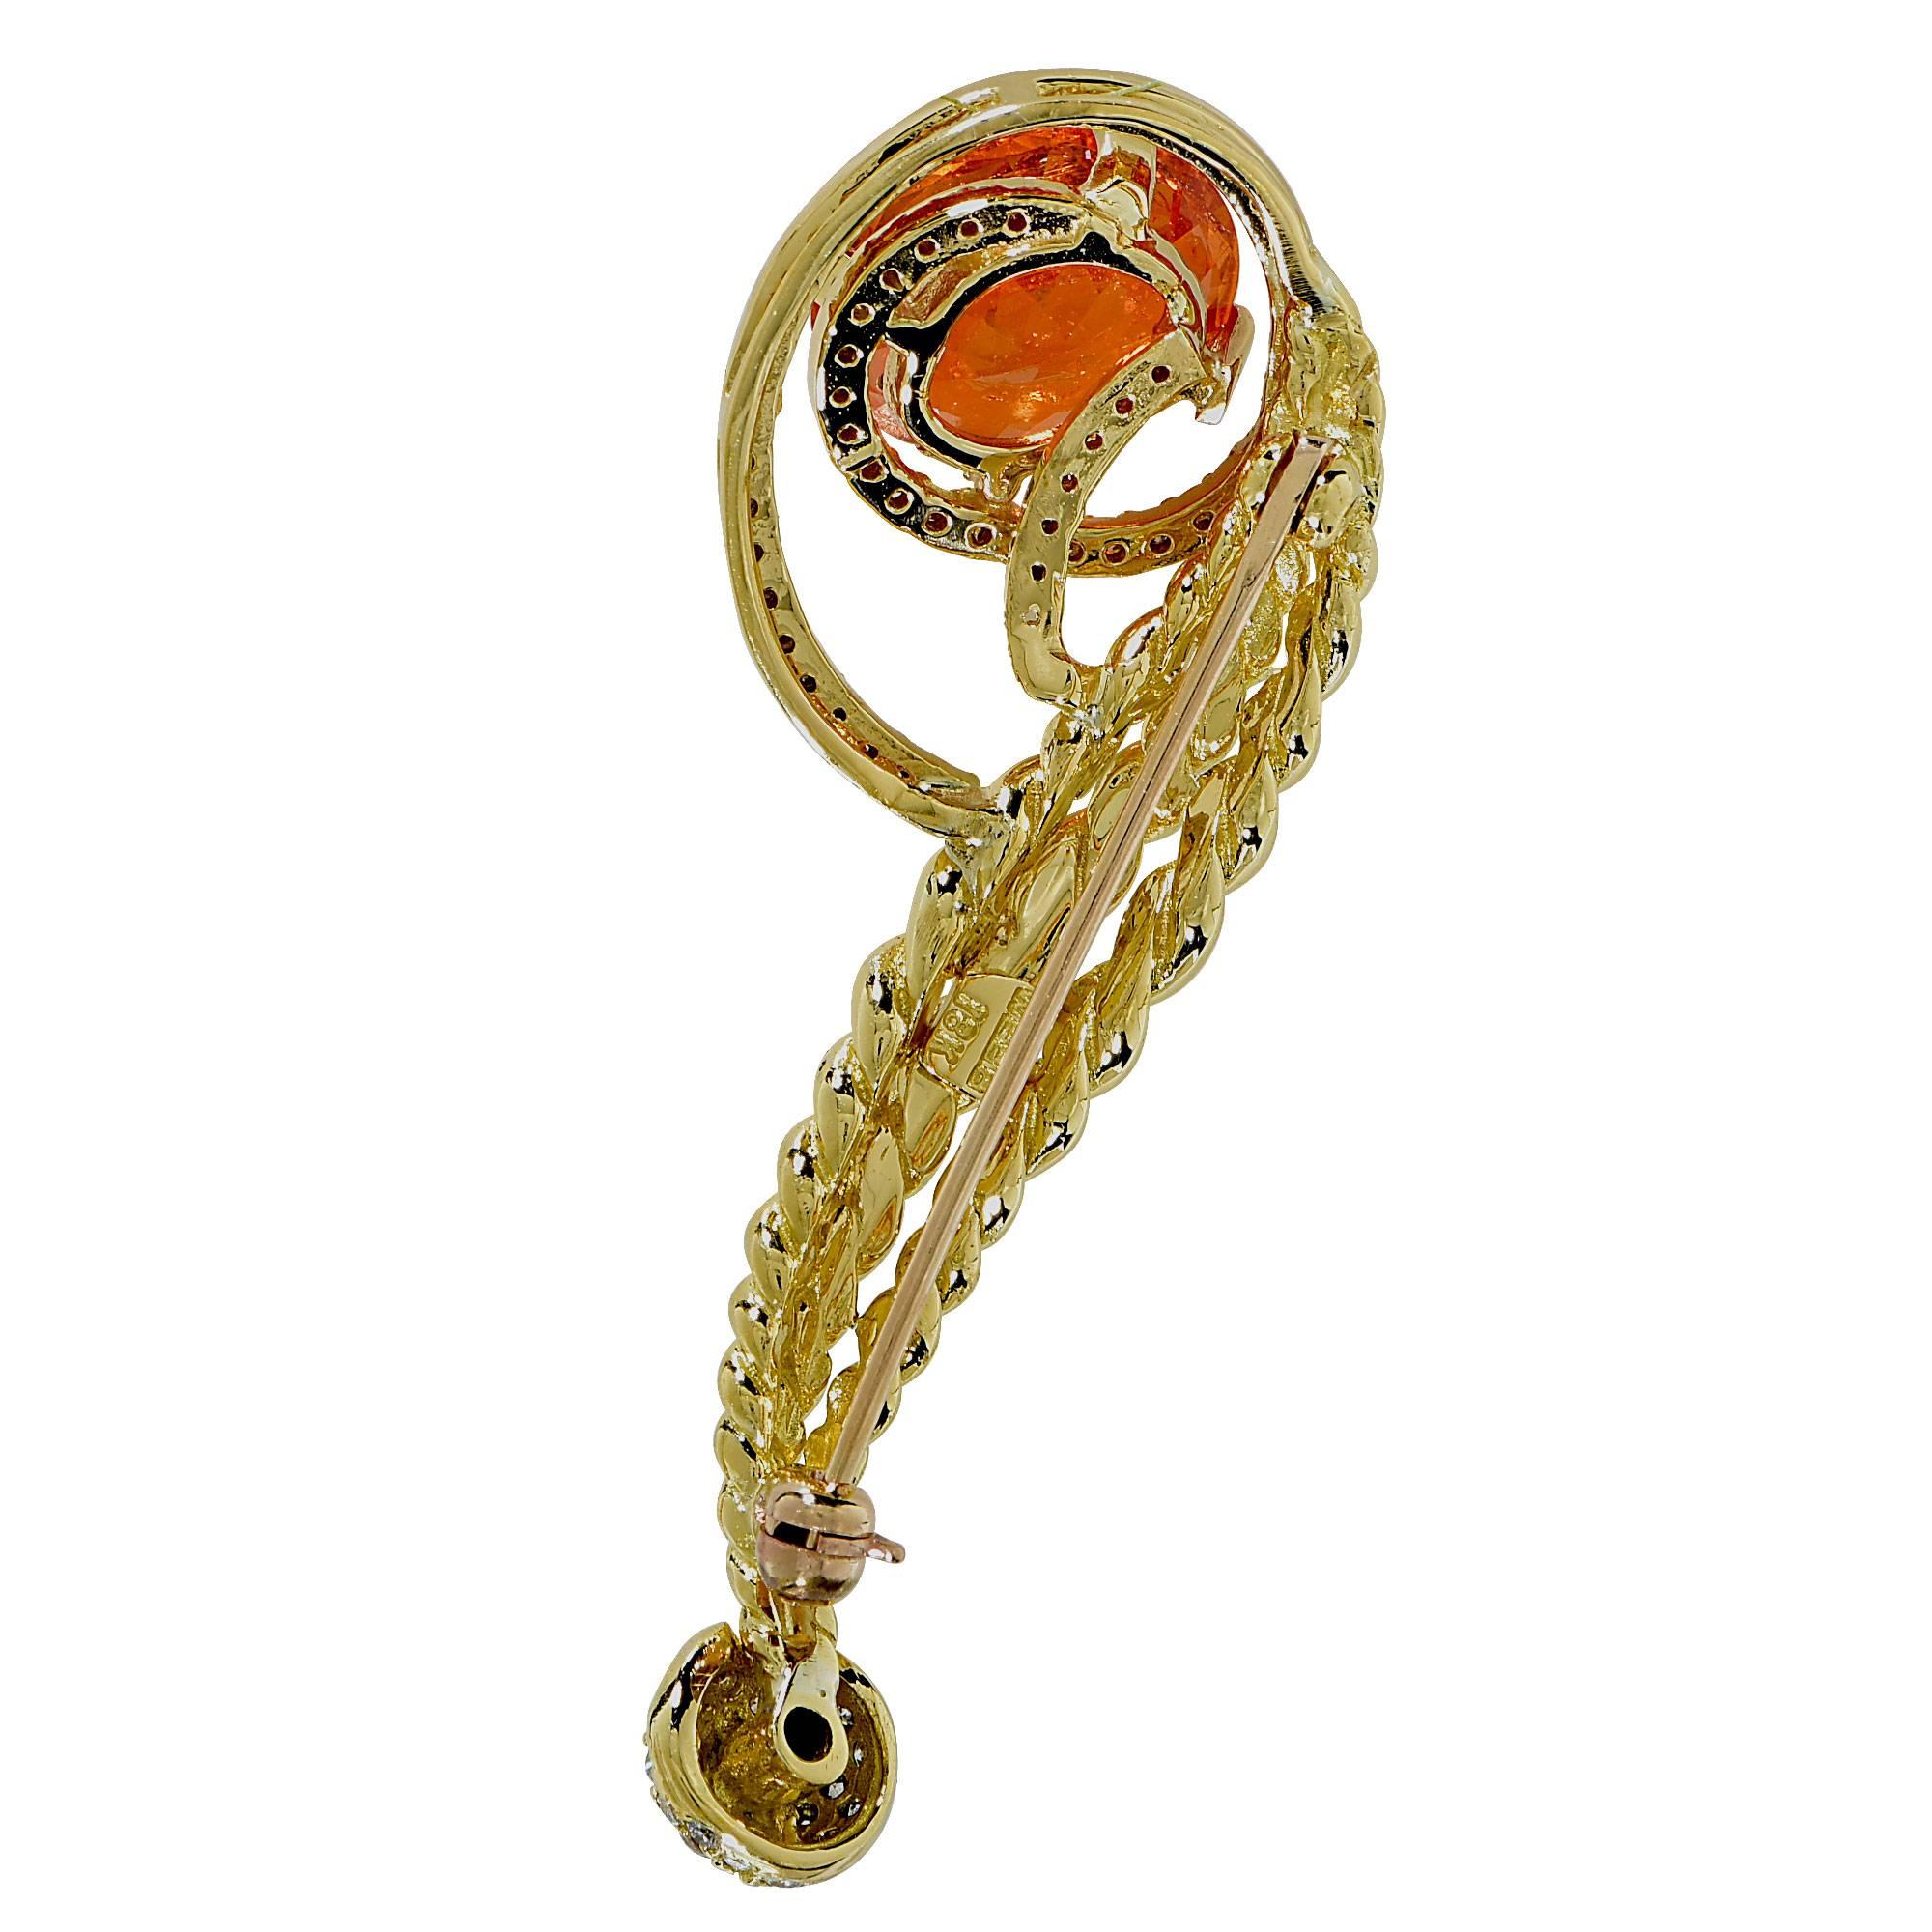 18K yellow gold David Webb brooch containing a 5ct Spessartite Garnet accented by 99 mixed cut diamonds weighing approximately .50cts.

This gold brooch is accompanied by a retail appraisal performed by a GIA Graduate Gemologist.